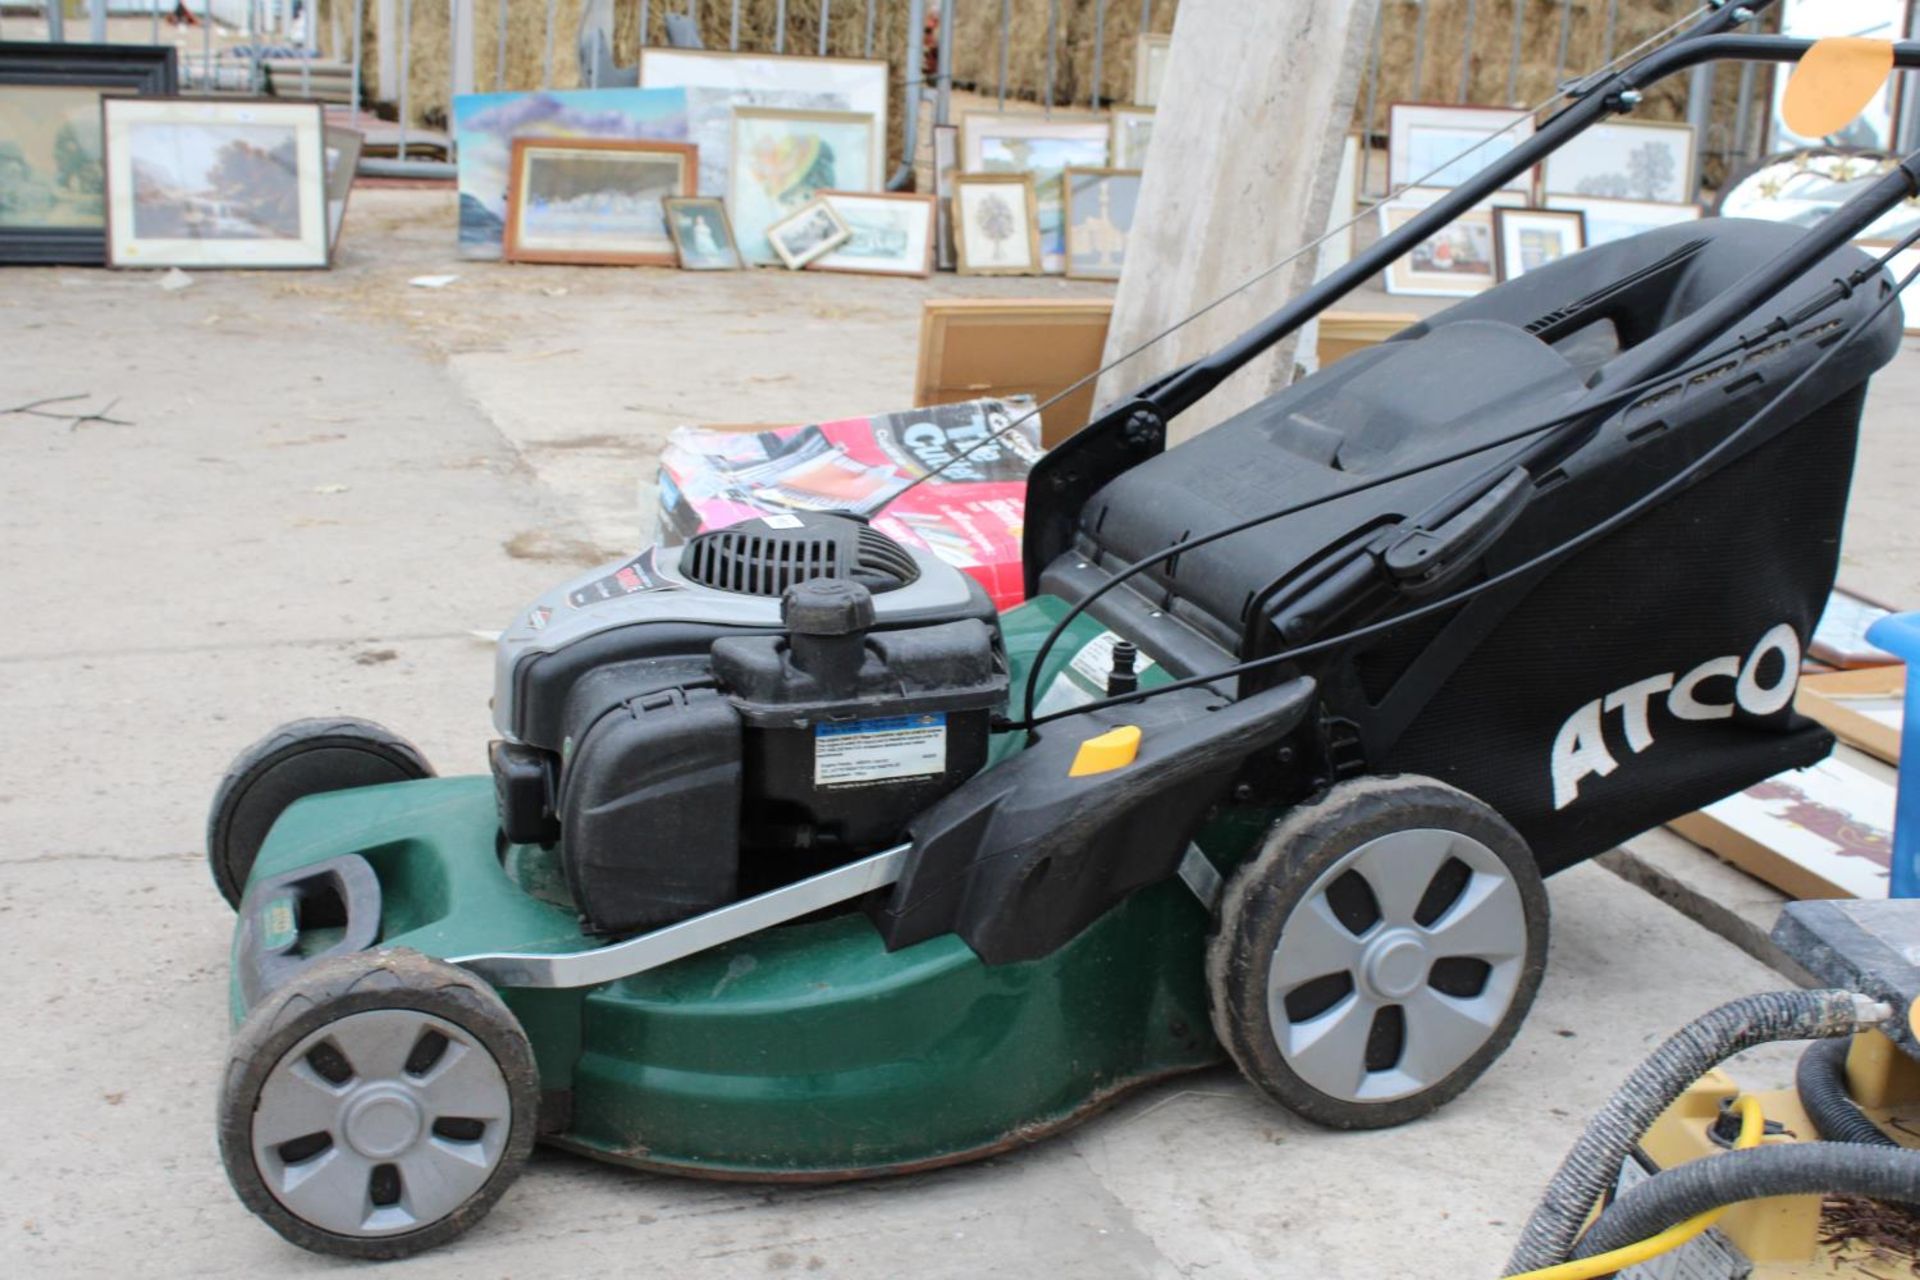 AN ATCO PETROL LAWN MOWER WITH GRASS BOX AND BRIGGS AND STRATTON ENGINE - Image 4 of 4